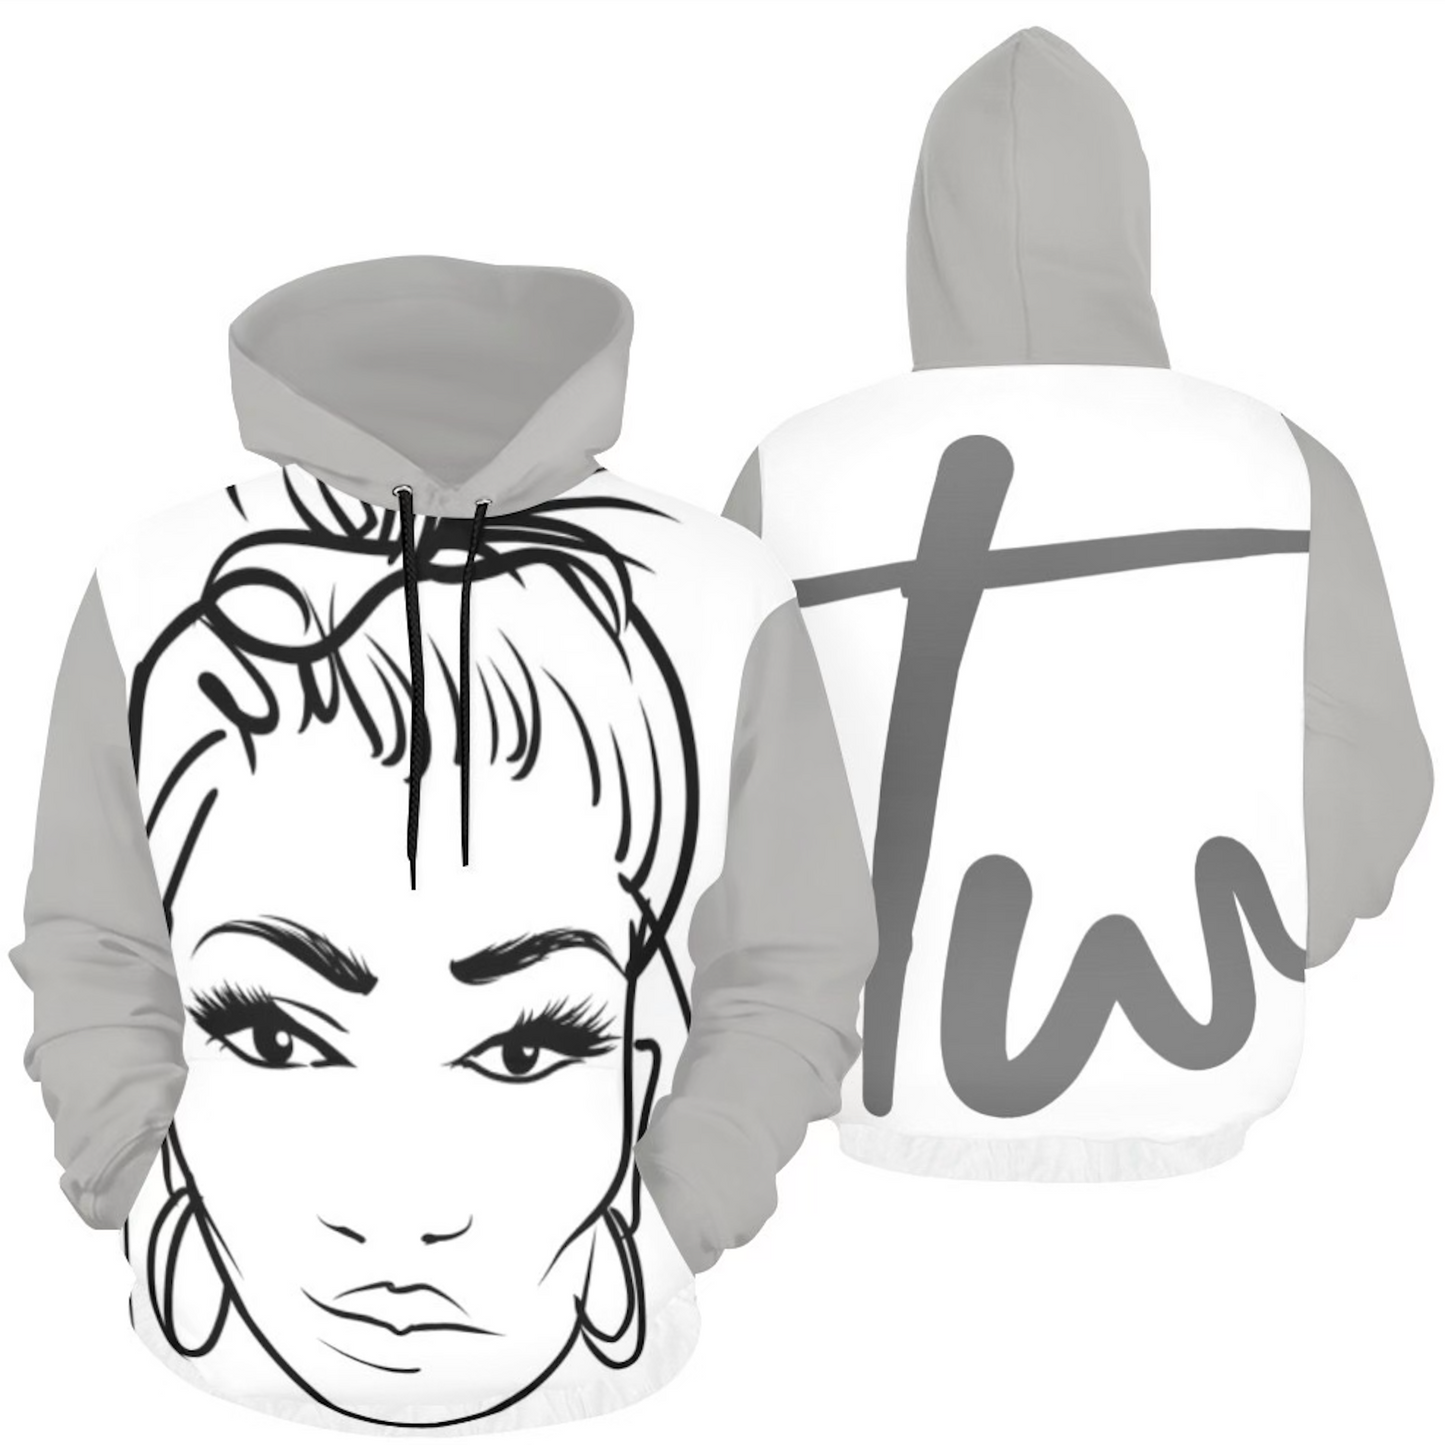 The T White Illustration Colorblock Hoodie